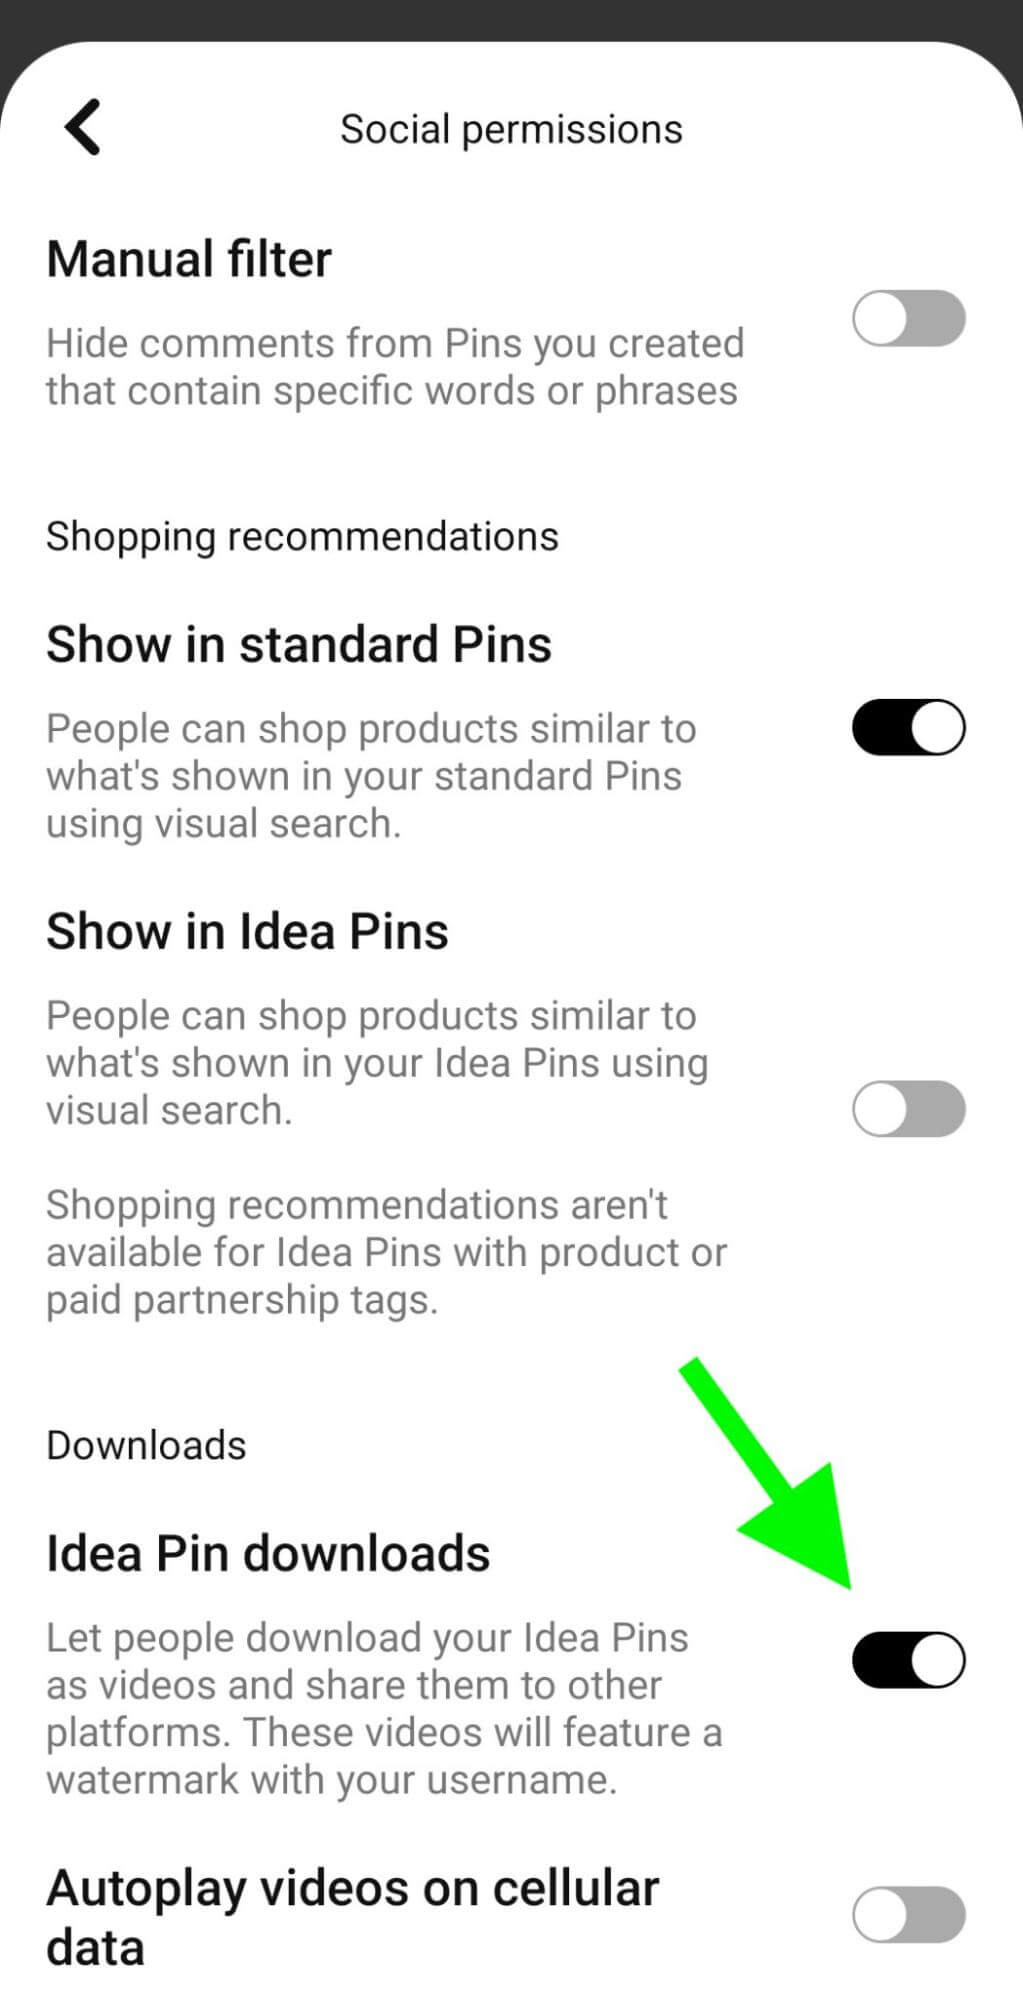 how-to-share-idea-pins-across-marketing-channels-download-social-permissions-step-17